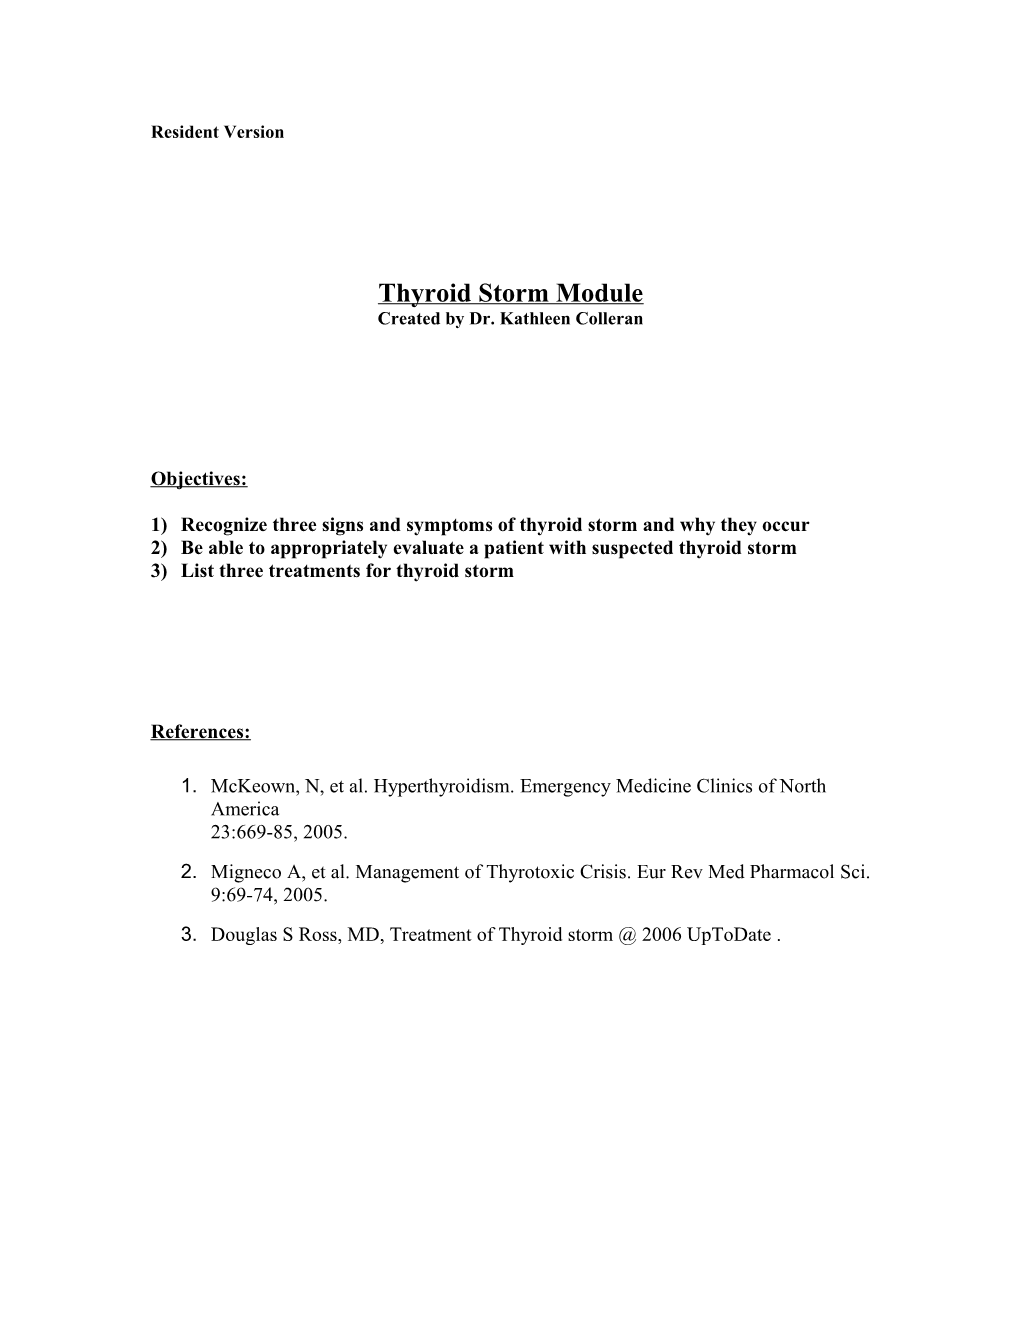 Resident Thyroid Storm Module: Created by Kathleen Colleran, MD